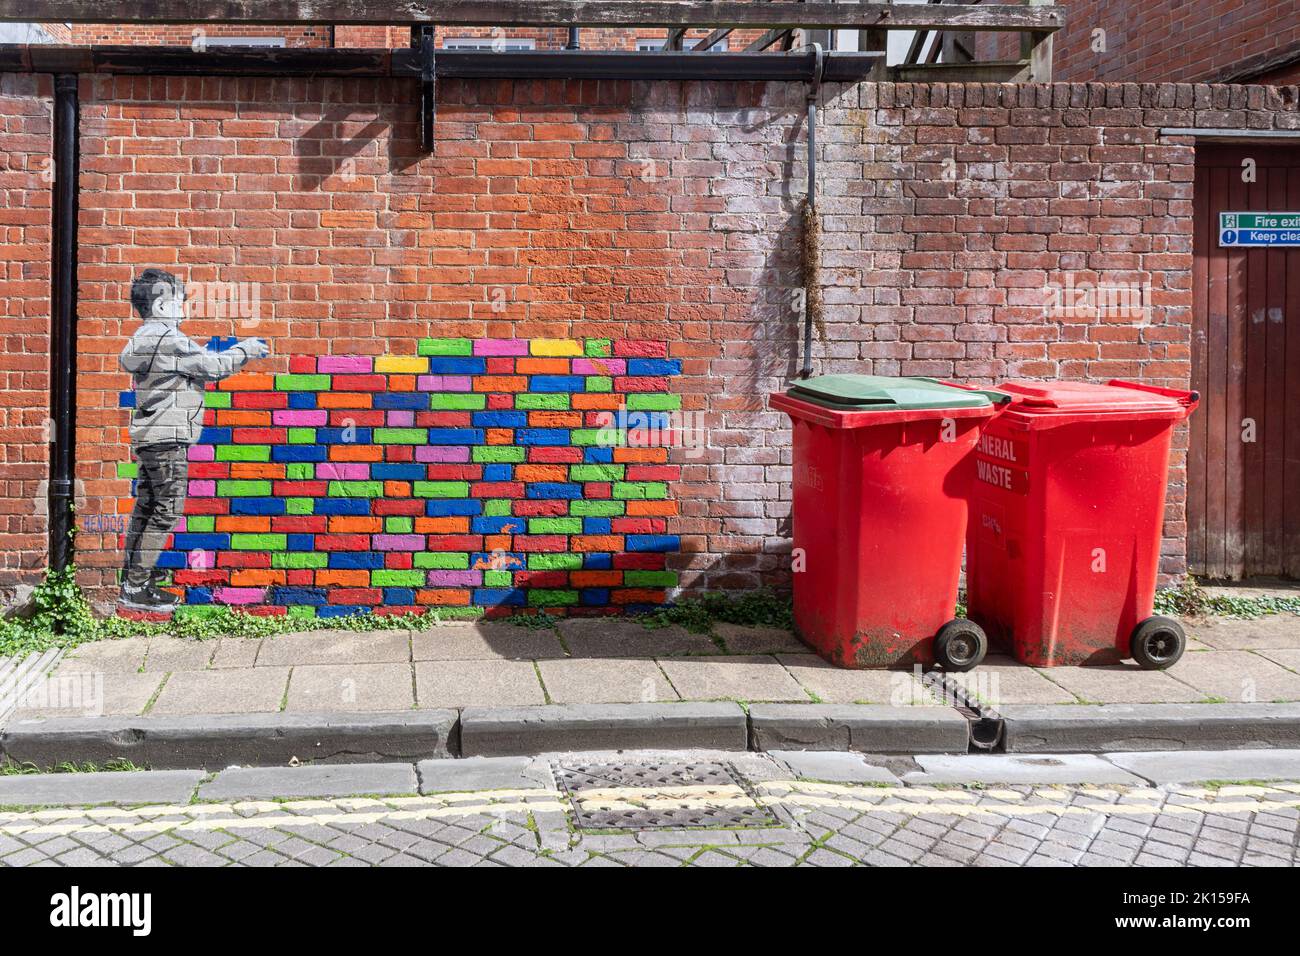 Street art mural by Hendog, an anonymous artist, depicting a young boy building a colourful lego wall, in Winchester, Hampshire, UK, next to bins. Stock Photo